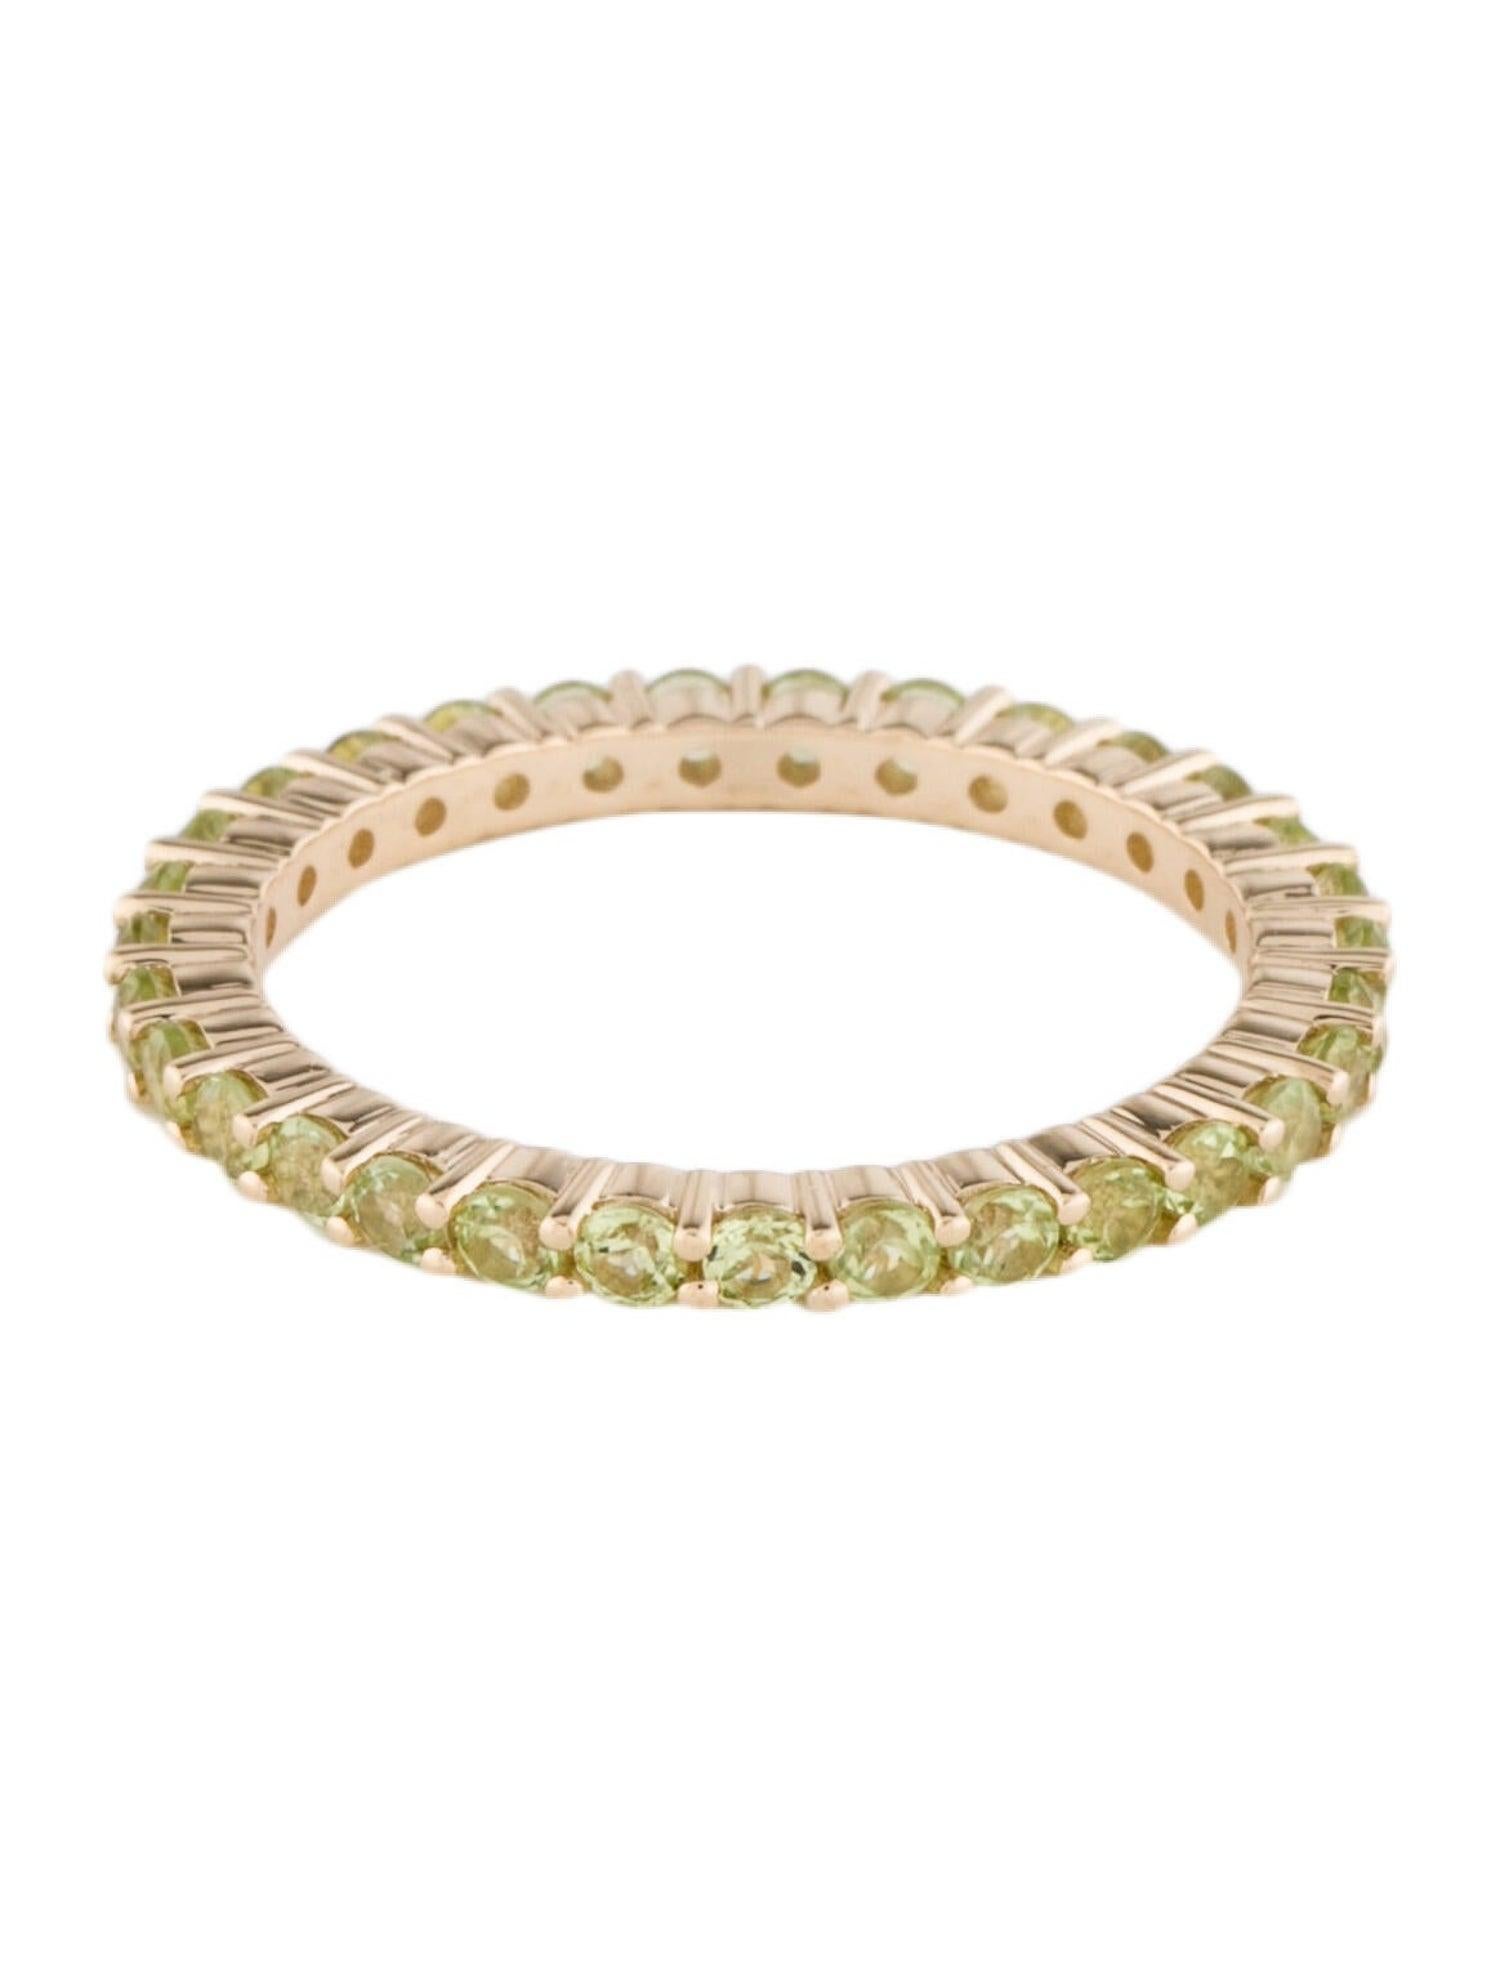 Brilliant Cut Chic 14K Peridot Eternity Band Ring, Size 7 - Timeless Statement Jewelry Piece For Sale